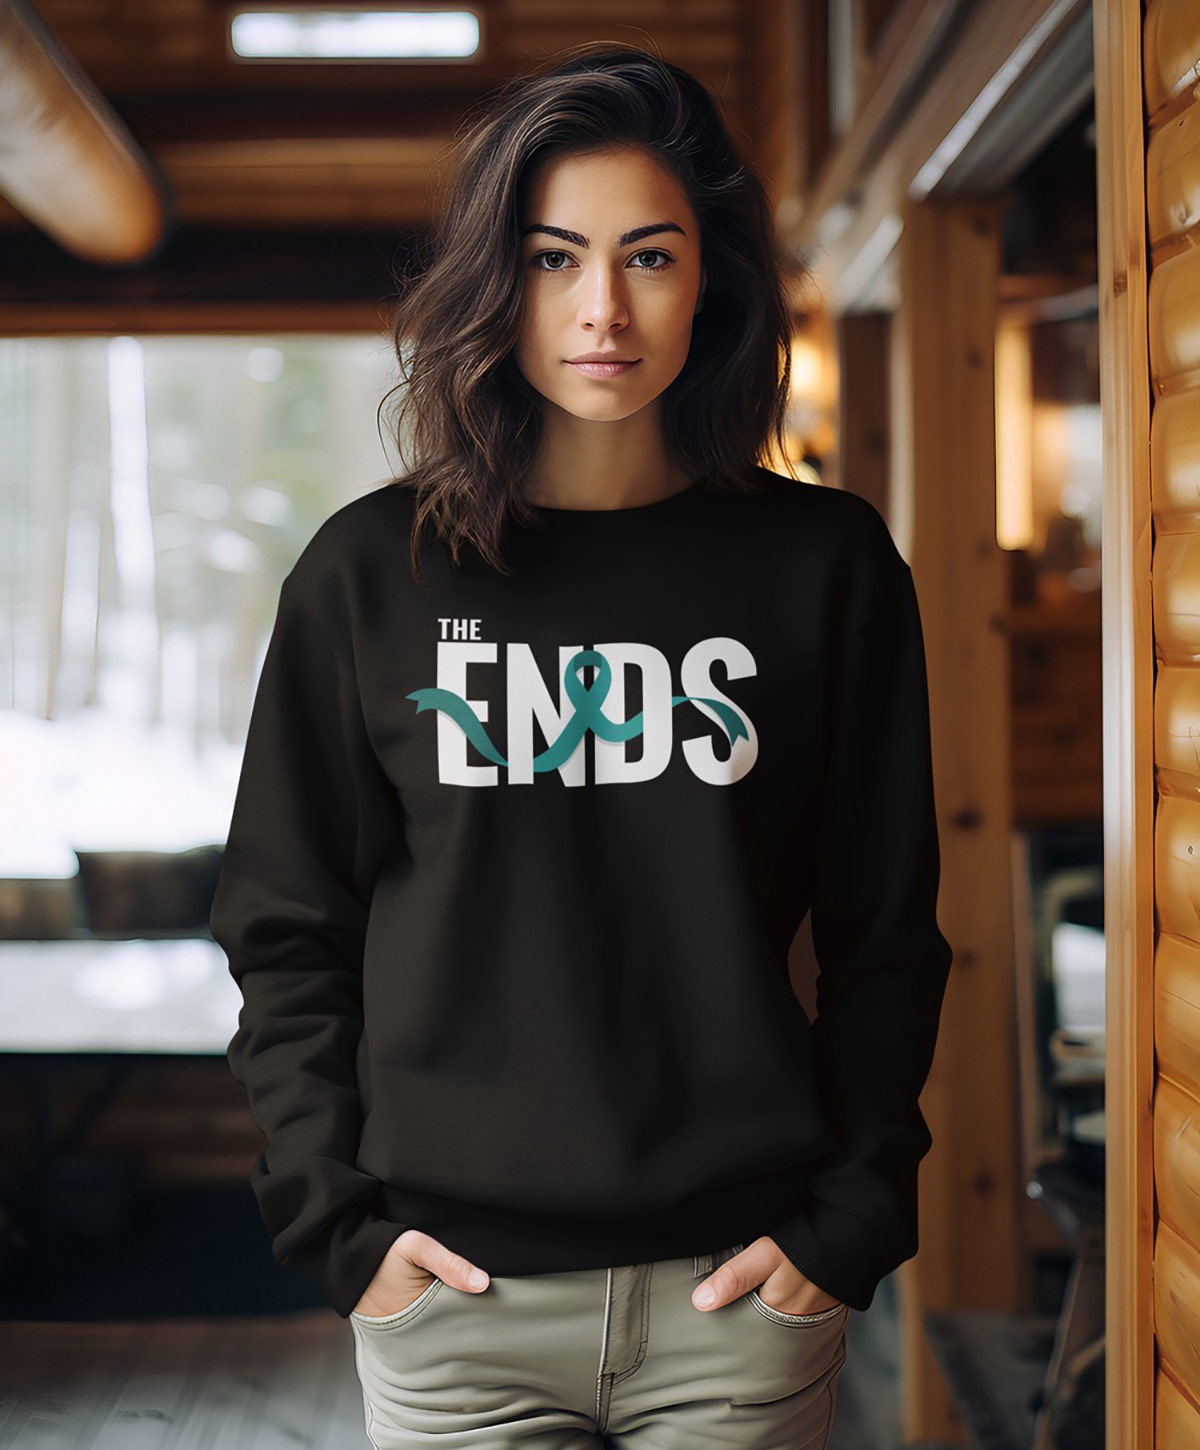 A young woman poses for a photo in a black sweater from The Ends Fight Ribbon collection.